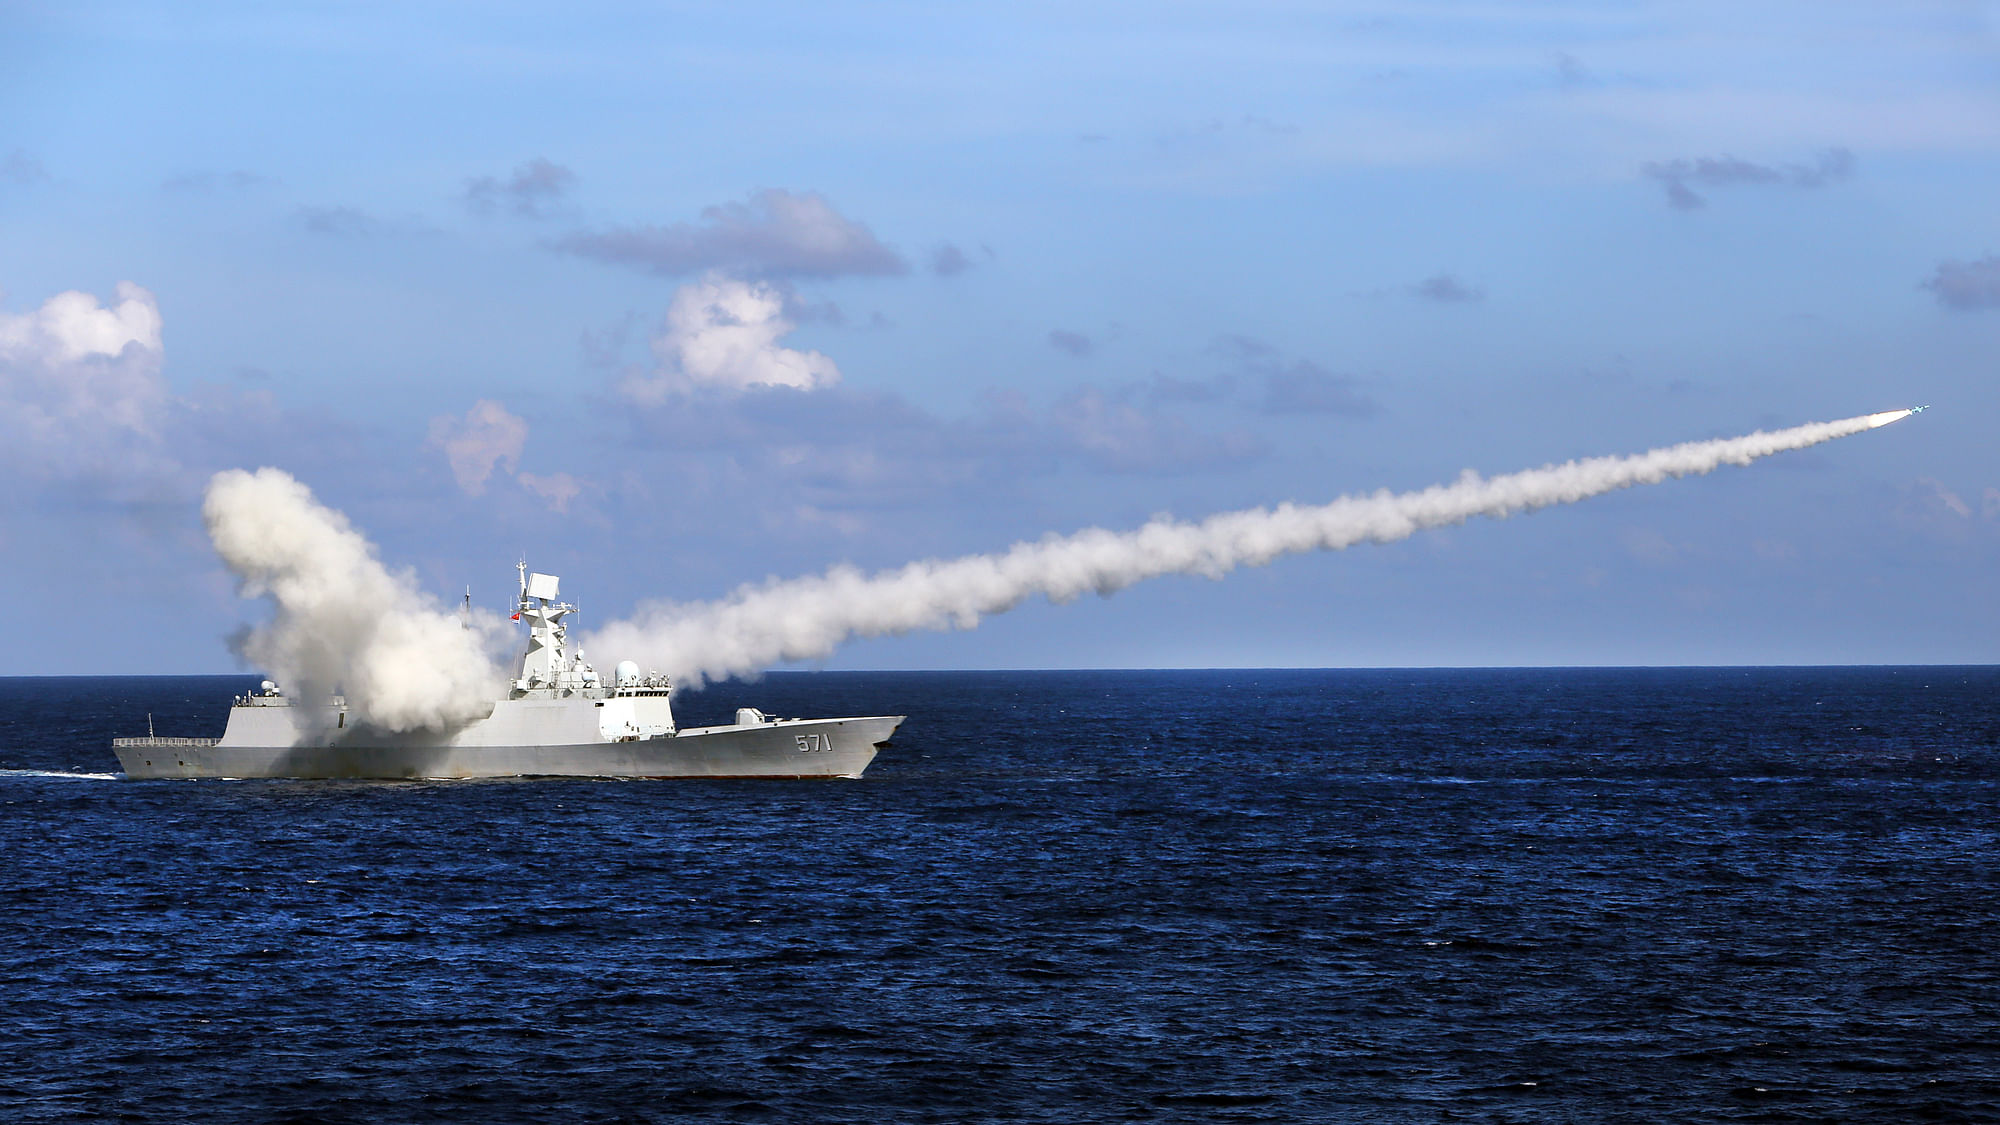 File photo of Chinese missile frigate Yuncheng launching an anti-ship missile during a military exercise in the waters near south China’s Hainan Island and Paracel Islands. (Photo: AP)